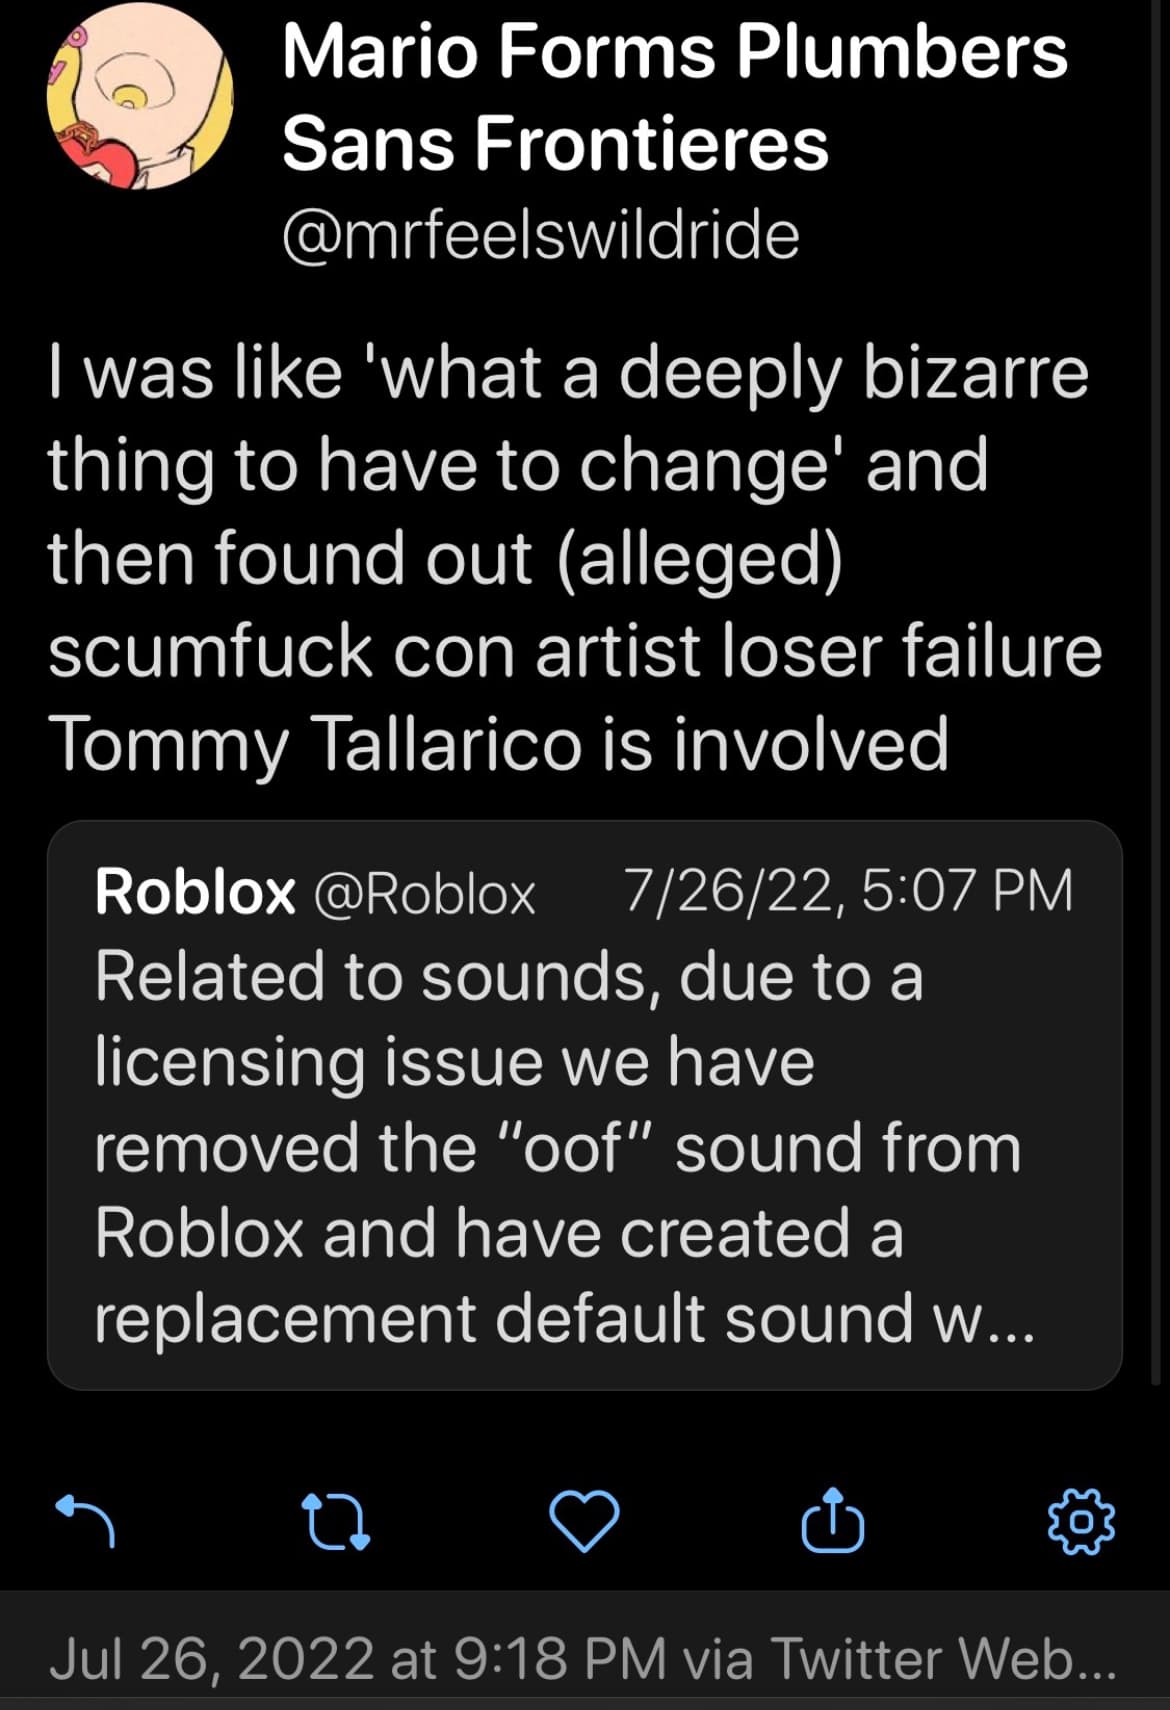 Roblox's iconic 'oof' sound removed due to licensing